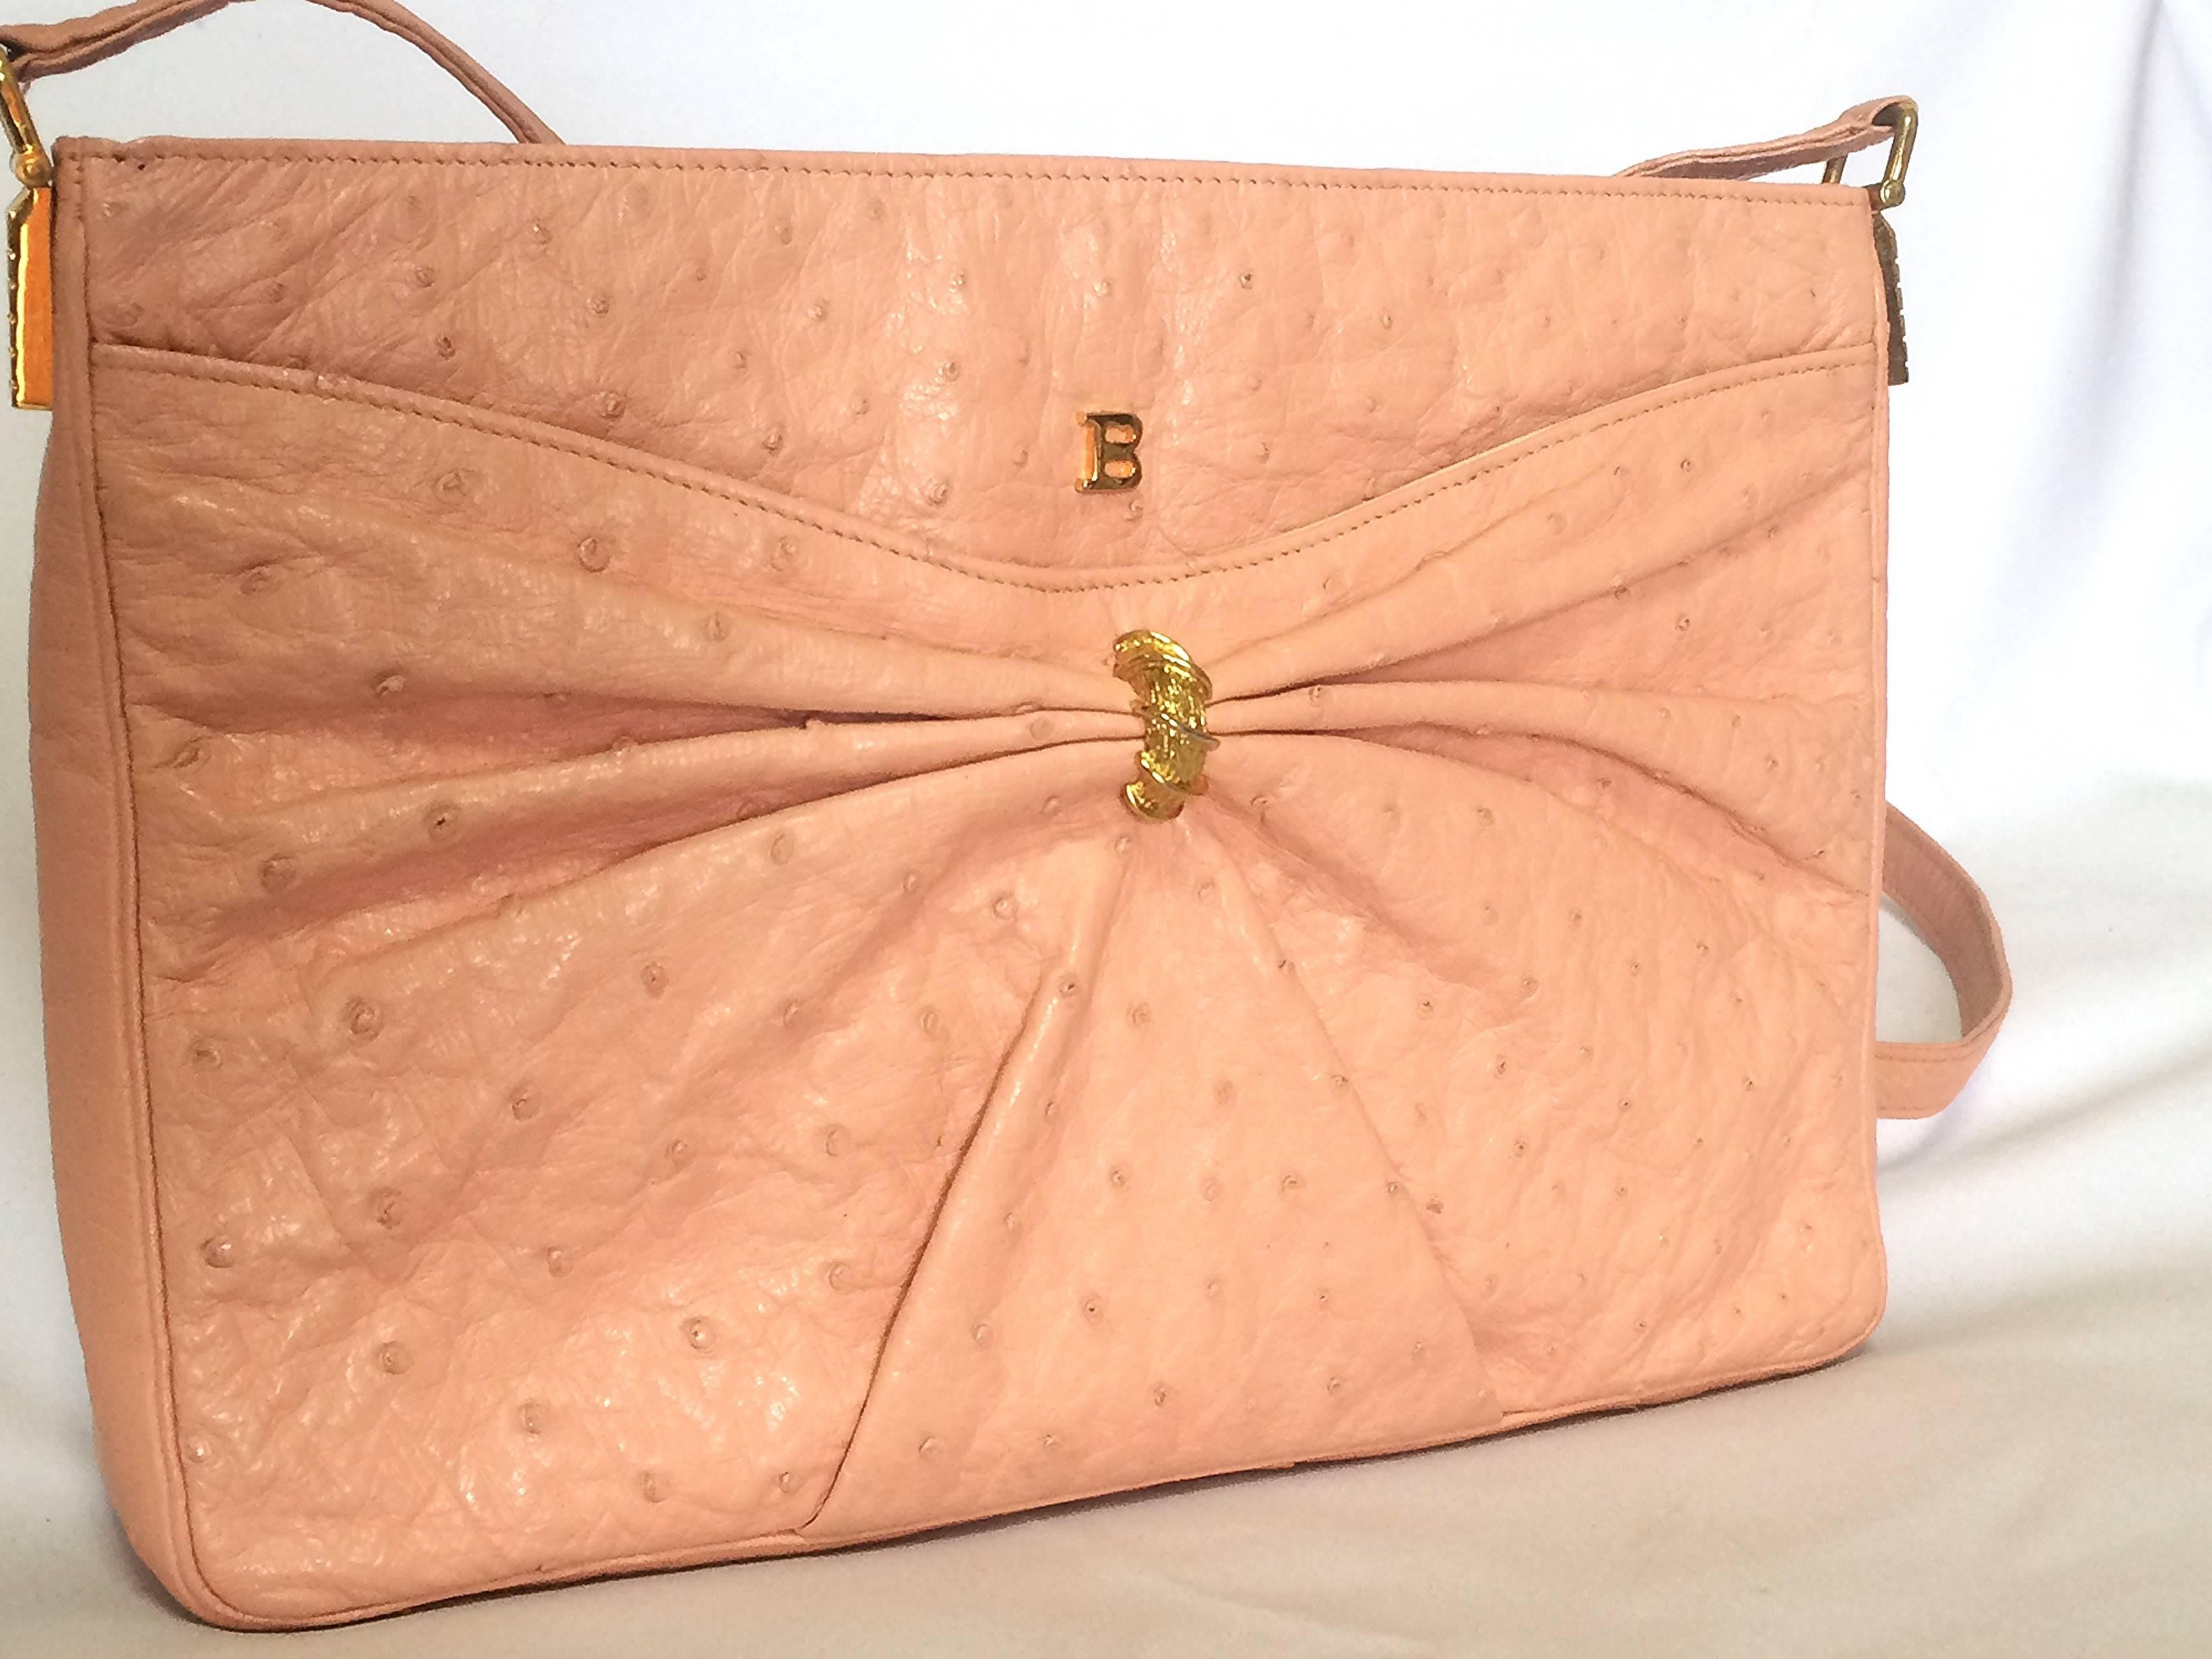 1980s. Vintage BALLY genuine milky pink ostrich leather shoulder bag with B logo motif and gathered design at front. Rare masterpiece.

This is a vintage Bally genuine ostrich leather shoulder bag in the 80s, made in Italy.
Beautiful milky pink